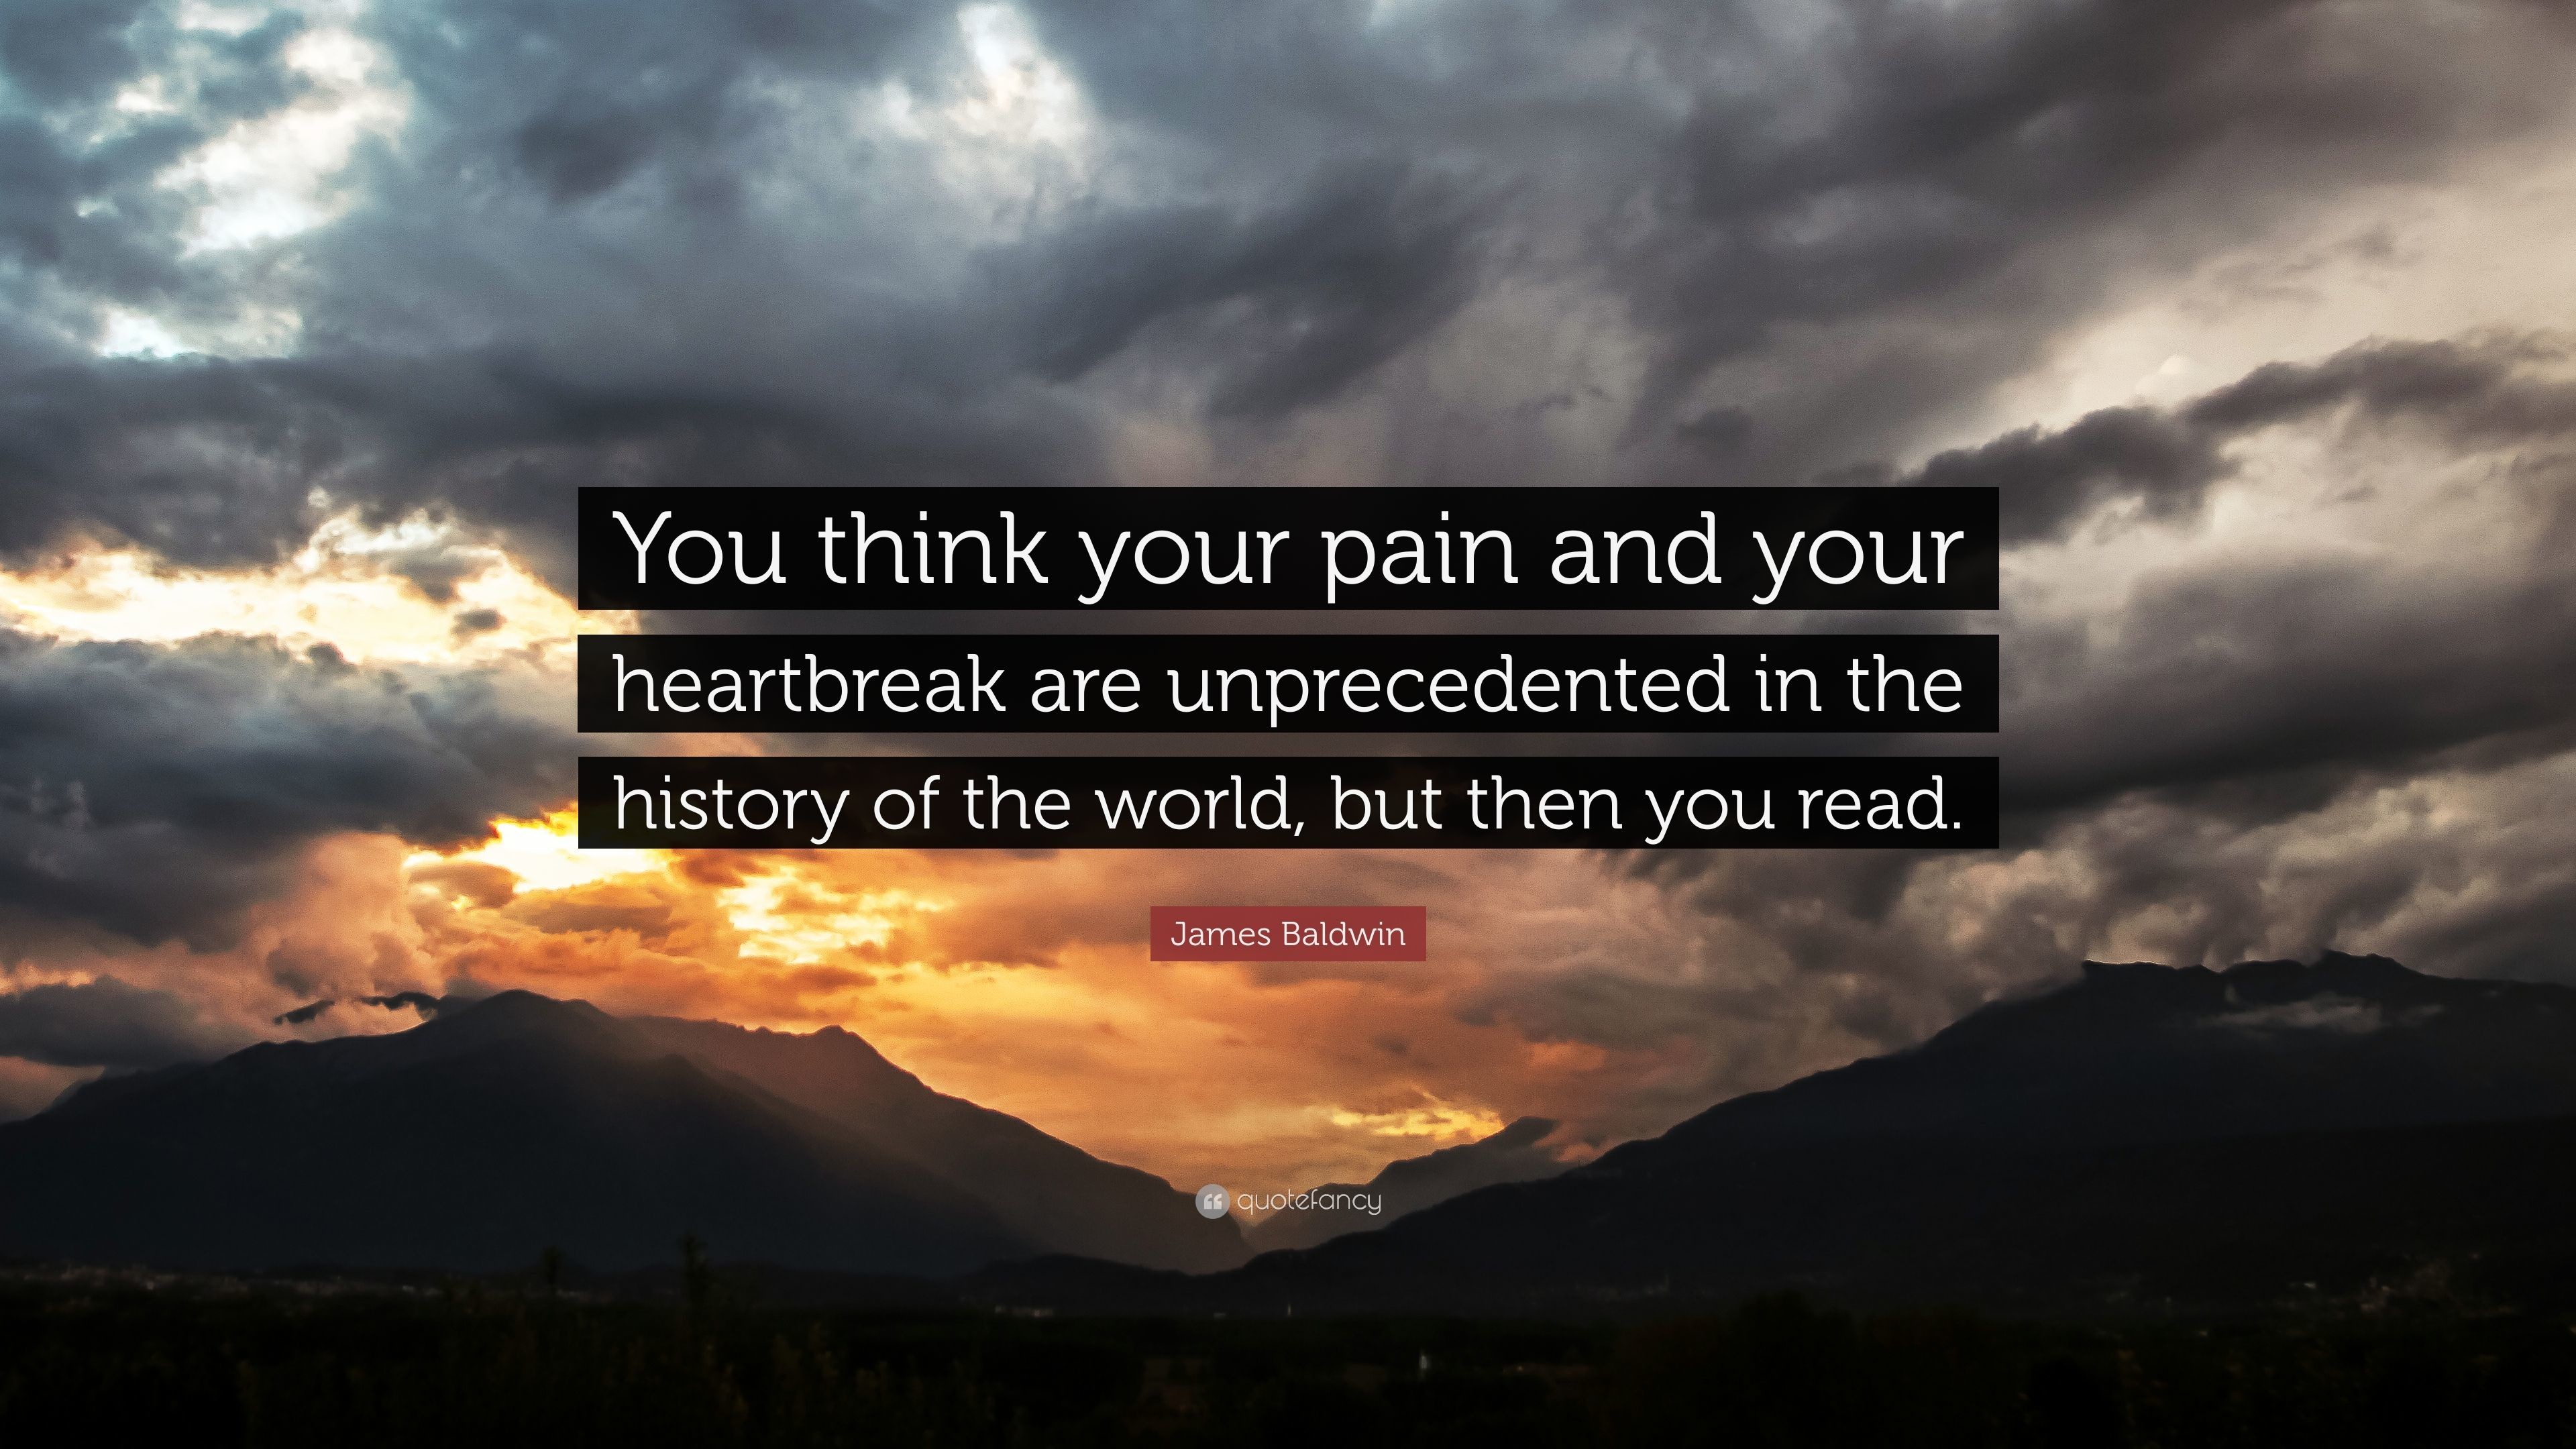 3840x2160 James Baldwin Quote: “You think your pain and your heartbreak are  unprecedented in the